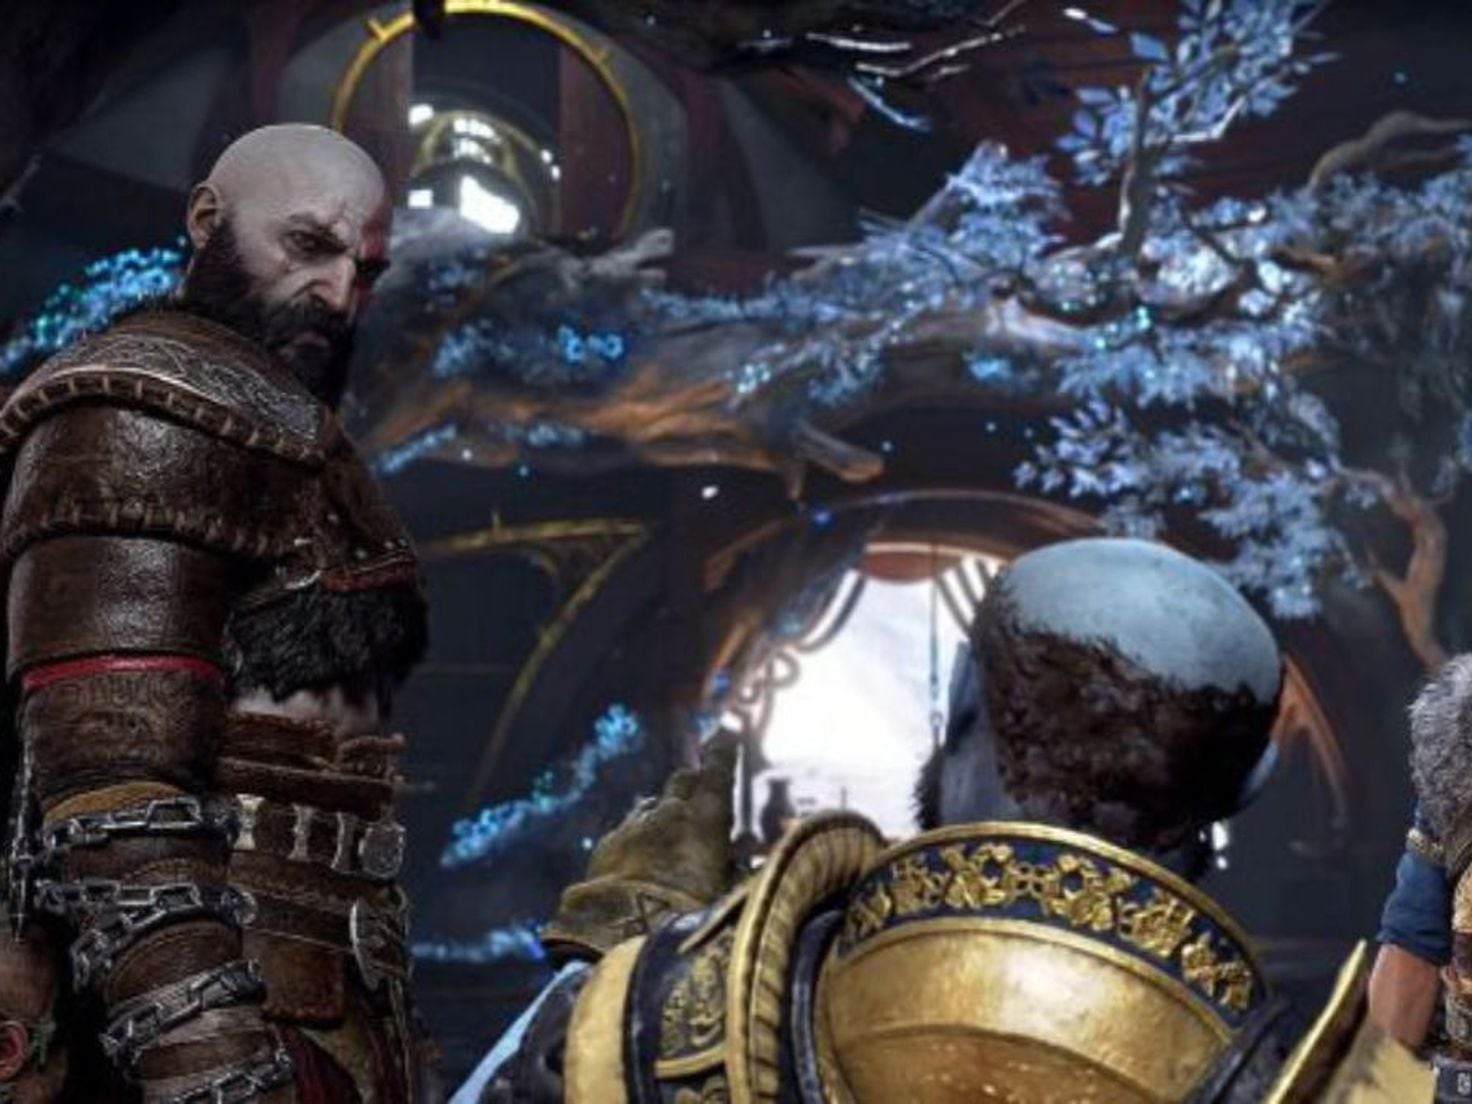 God of War Ragnarok PC Release Date: When is a PC Port Coming to Steam?